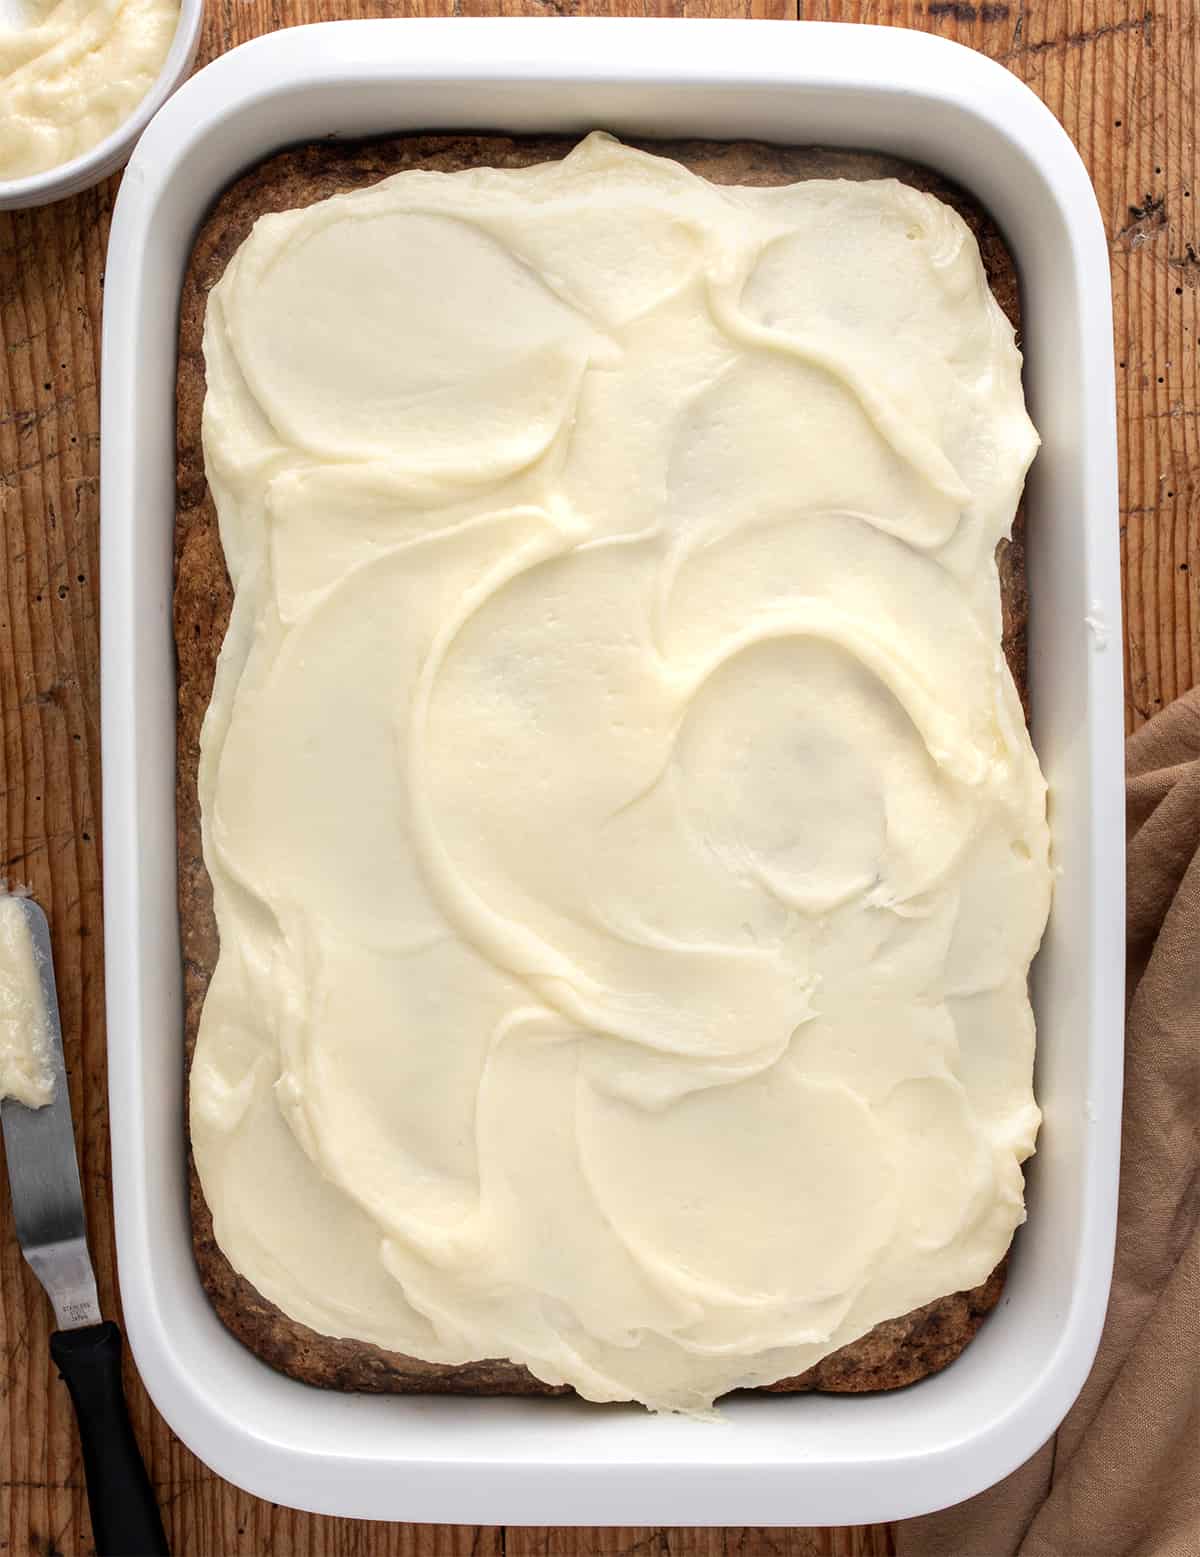 Pan of Zucchini Cake with Cream Cheese Frosting.